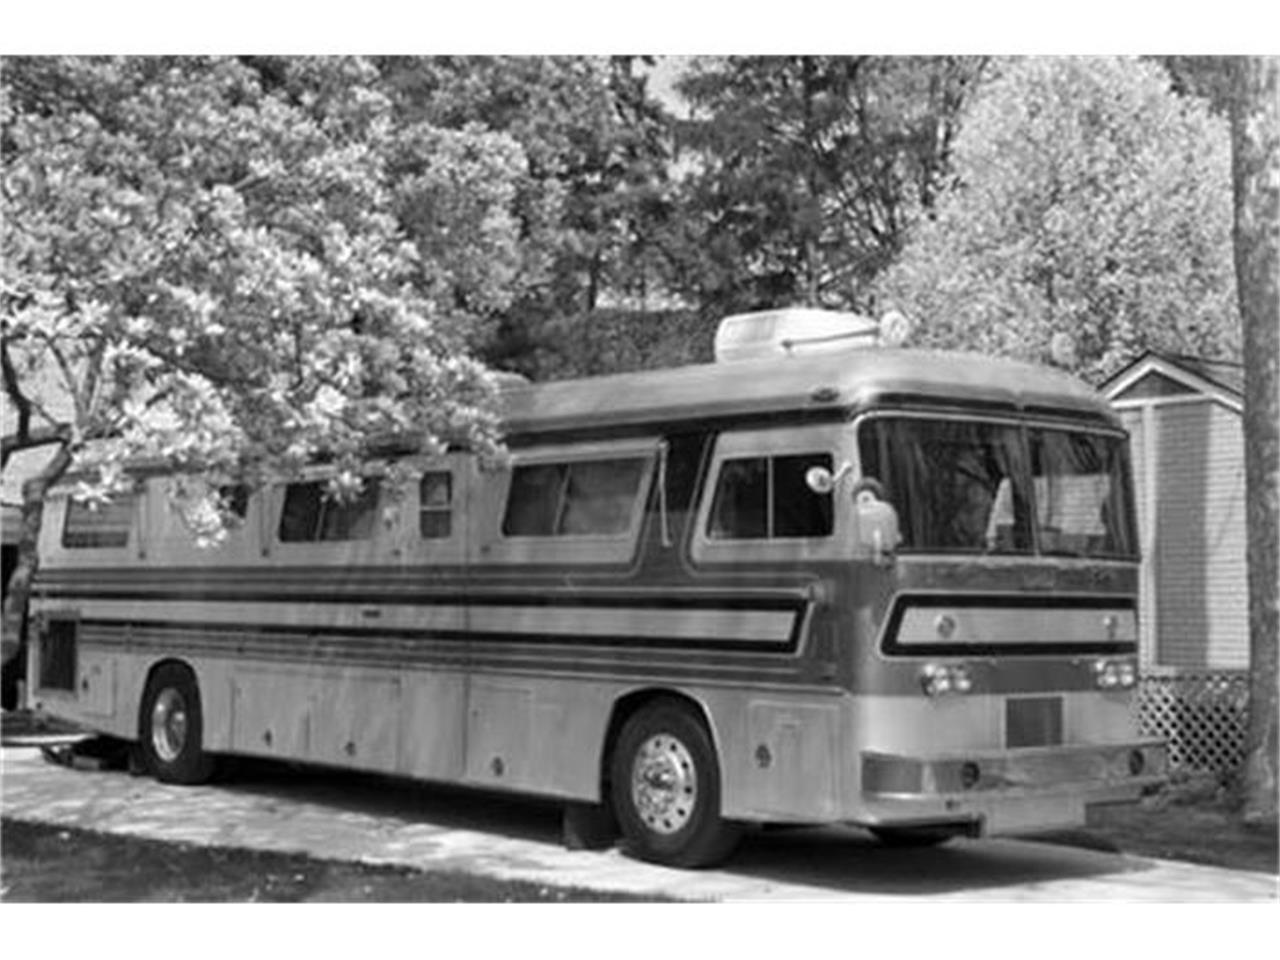 1978 Unspecified Recreational Vehicle for Sale | ClassicCars.com | CC ...